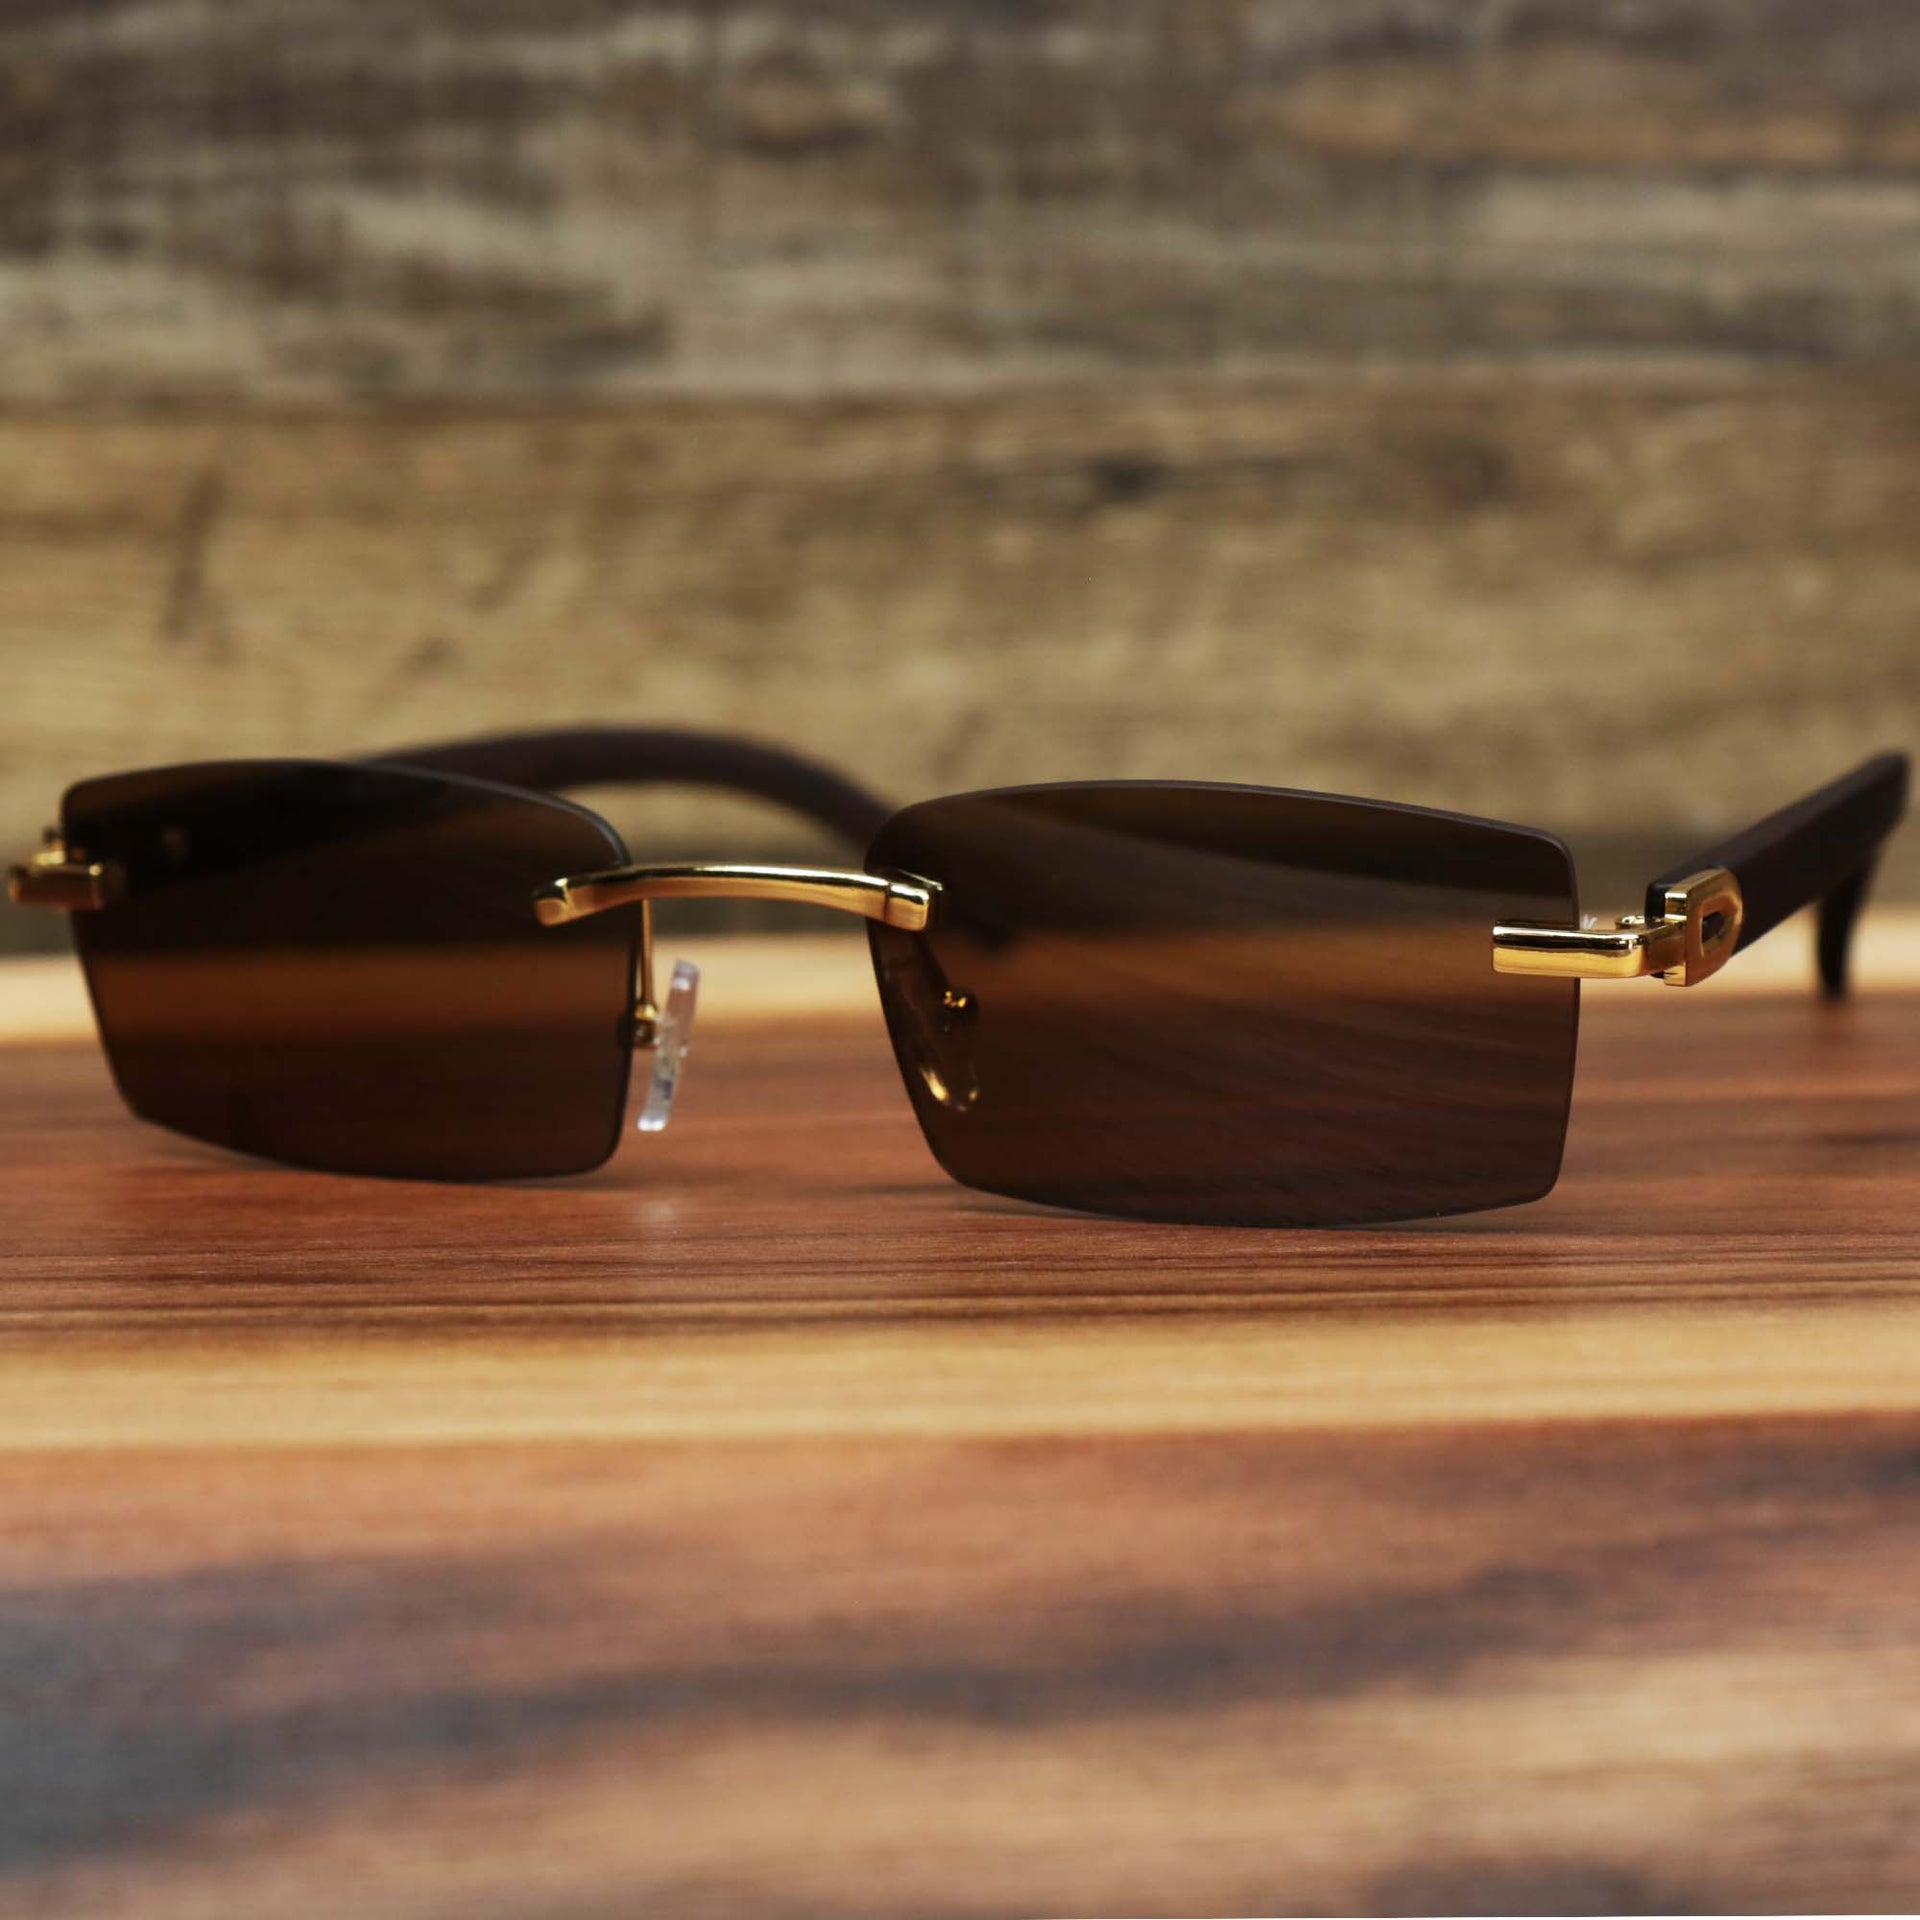 The Rectangle Wood and Metal Frame Brown Lens Sunglasses with Gold Frame